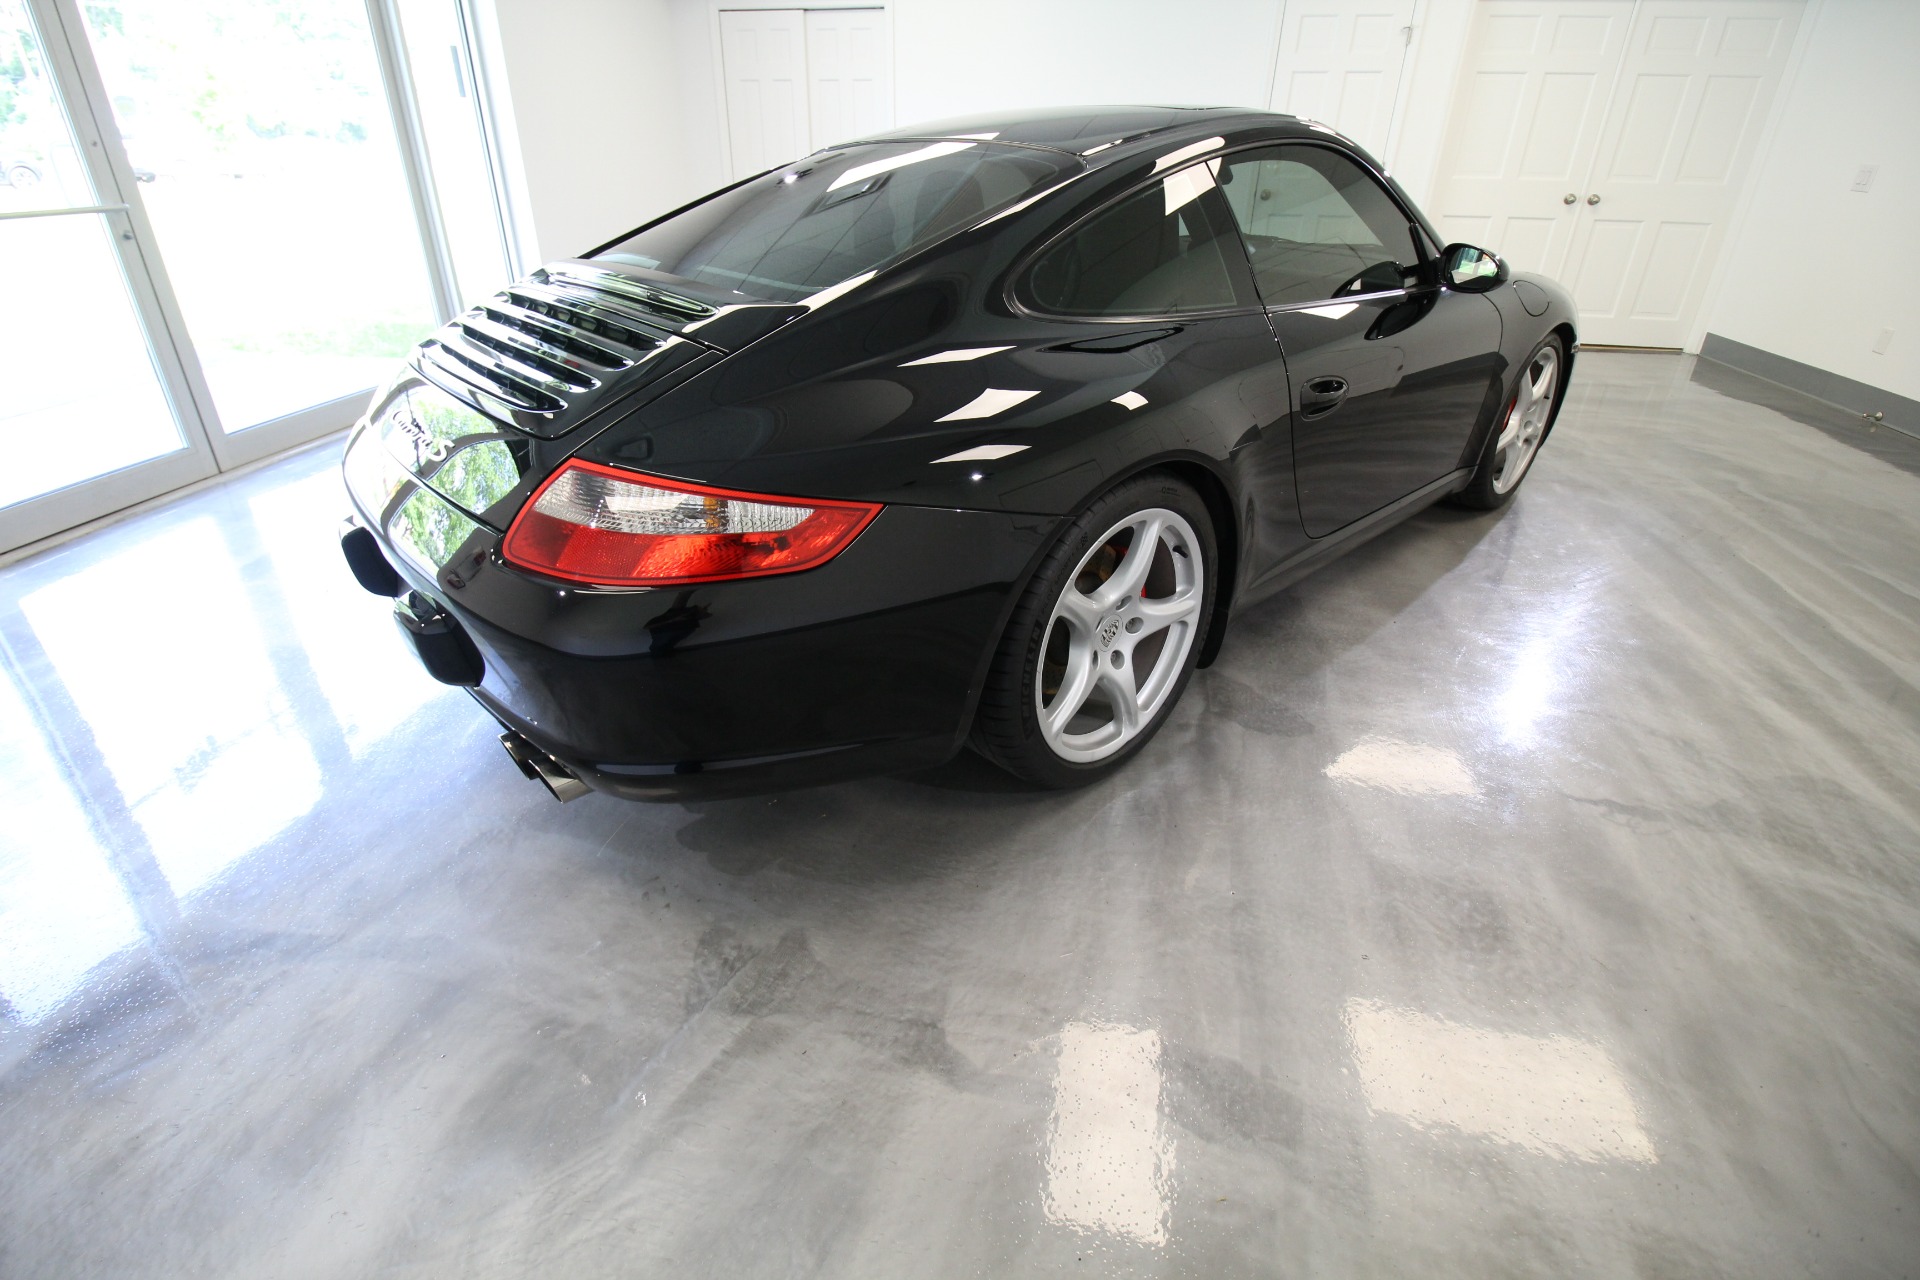 Used 2006 Black Porsche 911 Carrera S RARE 6 SPEED MANUAL NEW IMS AND CLUTCH IN 17 | Albany, NY